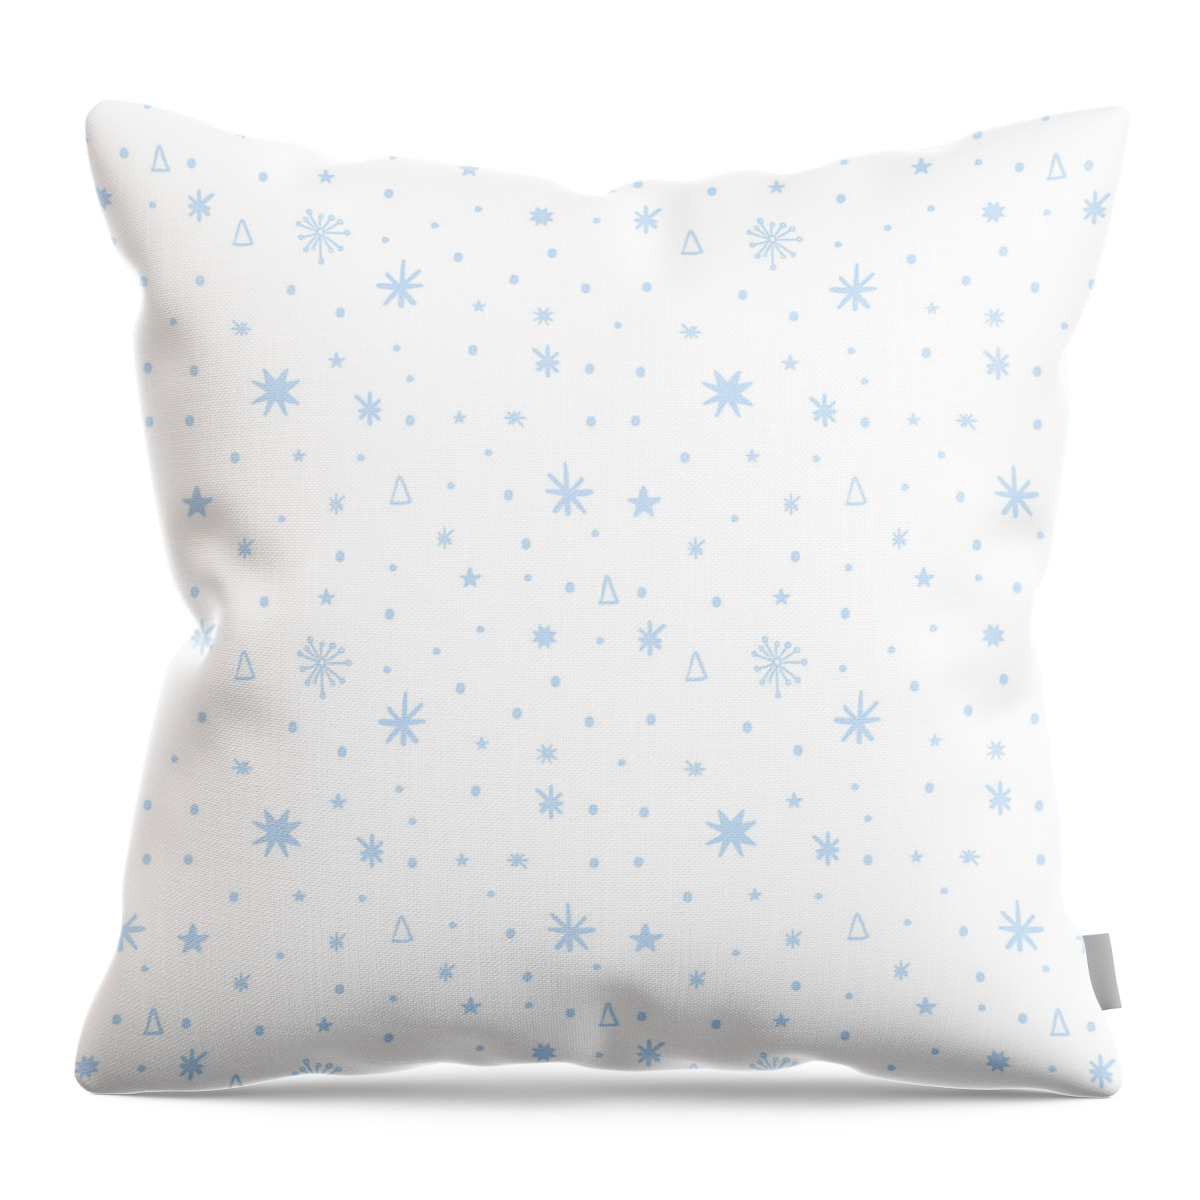 Stars Throw Pillow featuring the painting Simple Stars and Snow Pattern - Art by Jen Montgomery by Jen Montgomery